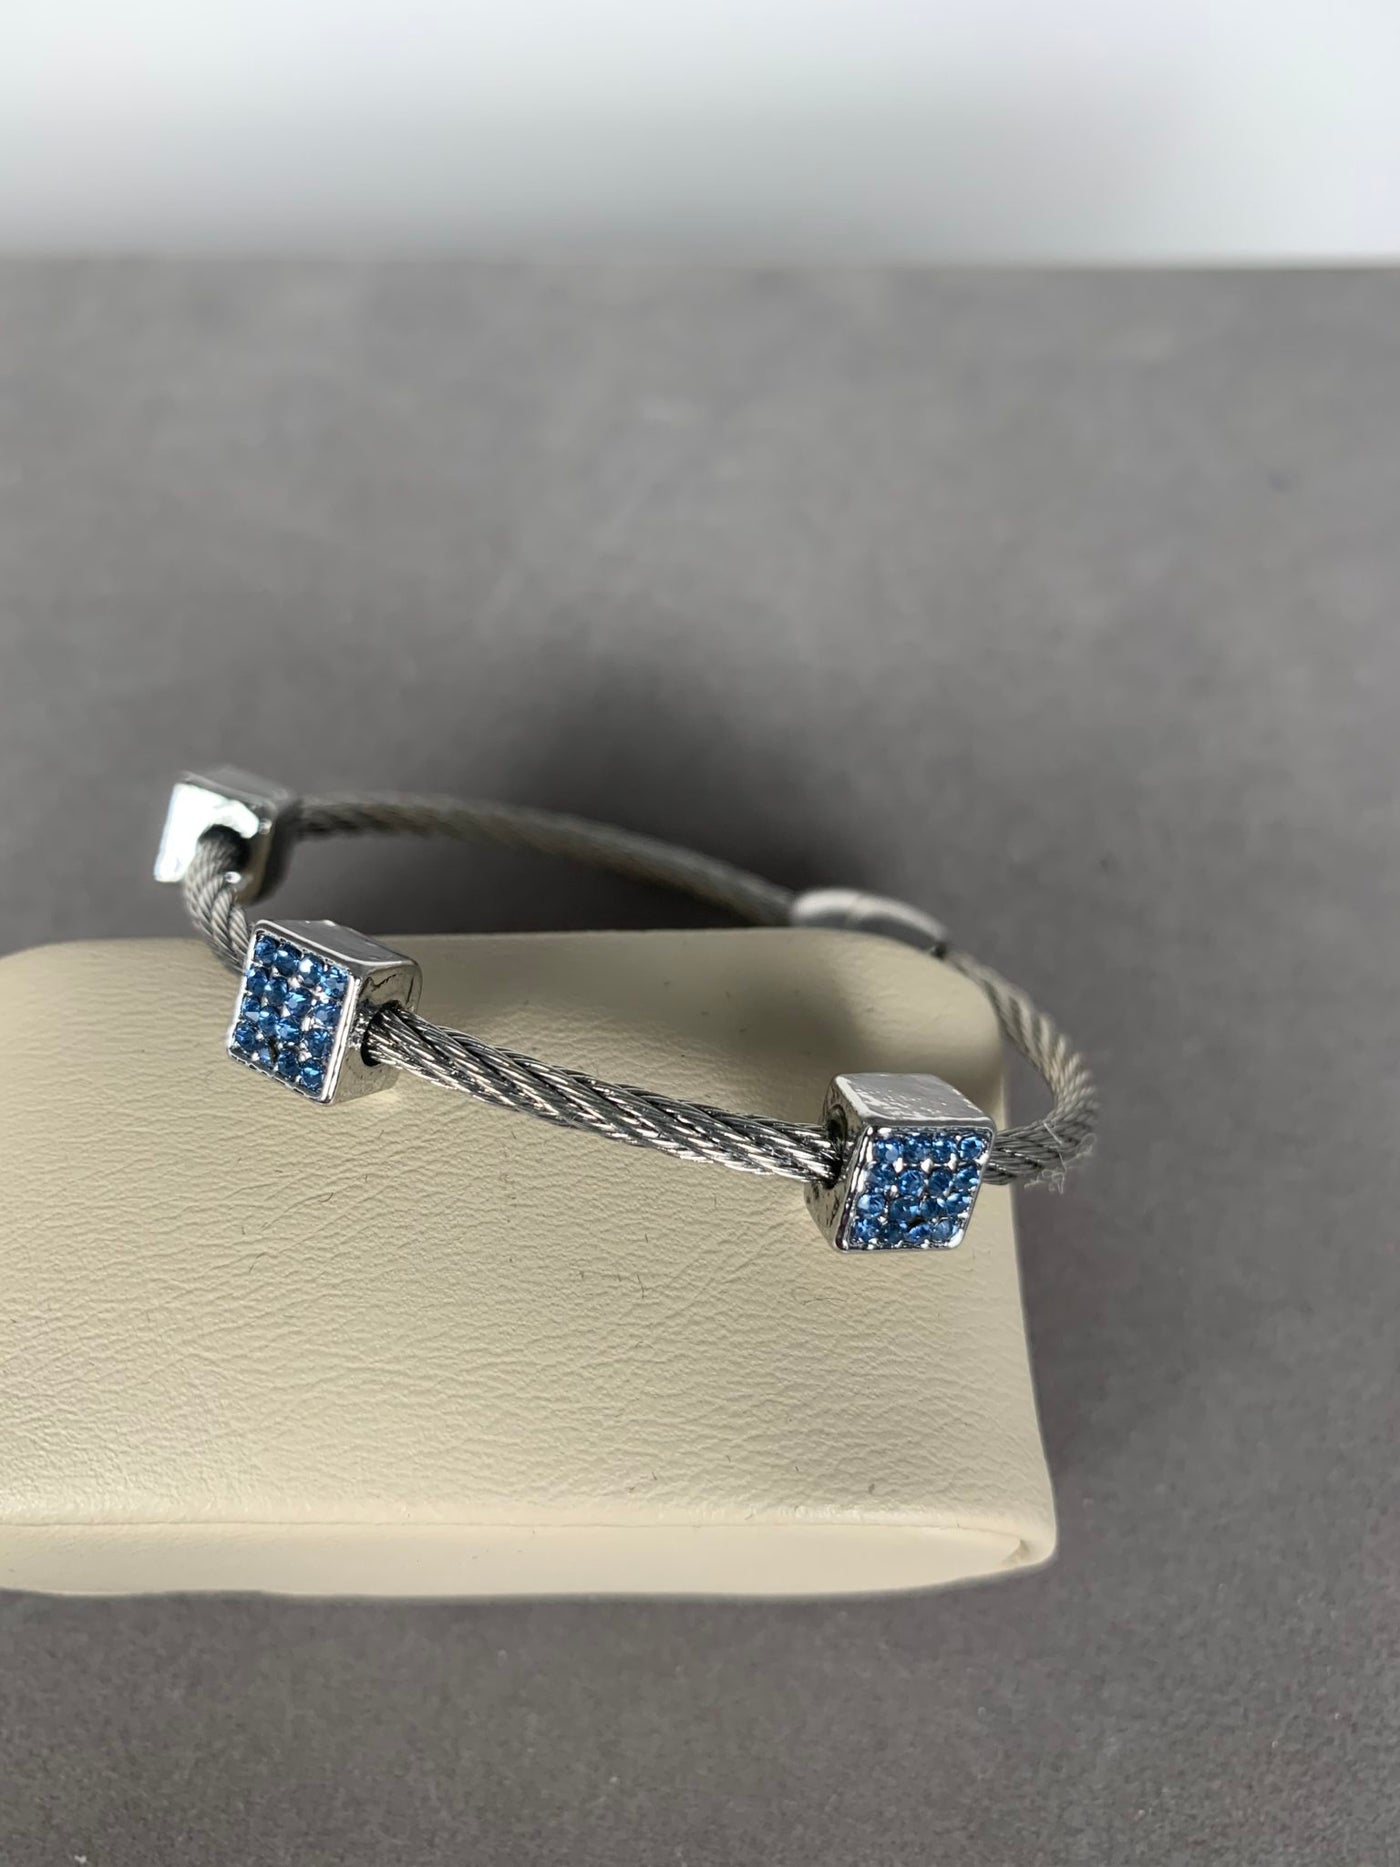 Silver Tone Wire Bangle Bracelet with 3 Pave Blue Crystal Square Motifs